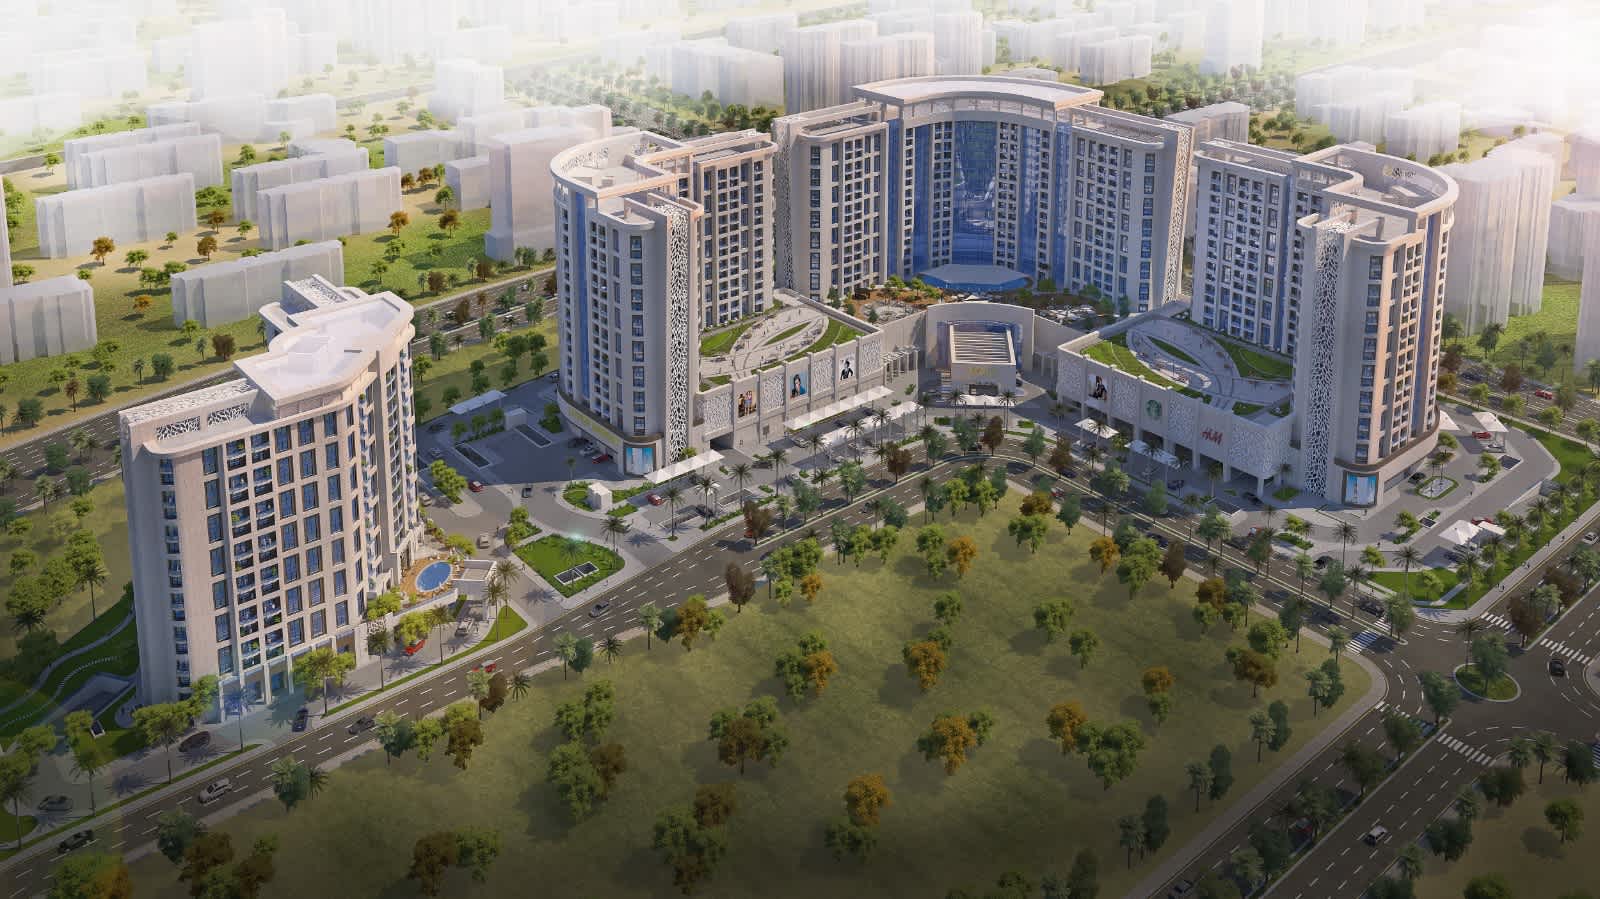 25 Spaces Real Estate - Lusail - New Development - 22nd of Sept 2021 4